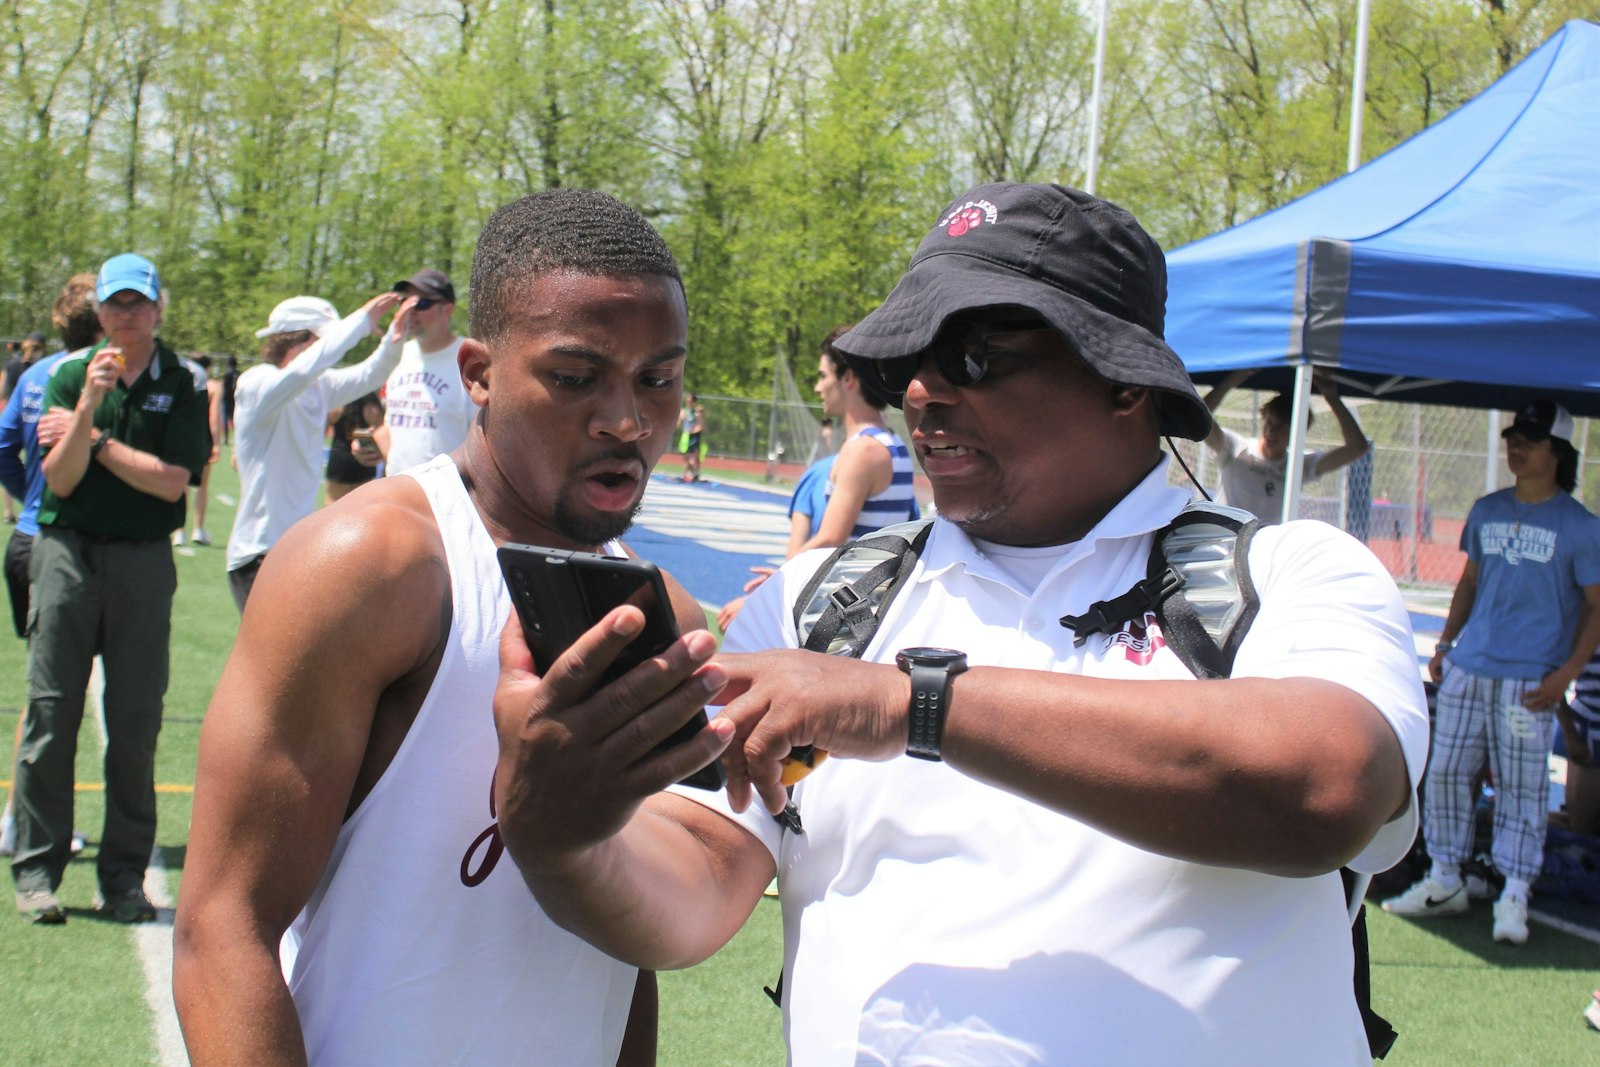 University of Detroit Jesuit coach Carl Brock shows his stopwatch to senior Kamari Tensley, verifying that Tensley broke two minutes in the 800-meter run for the first time (1:59.65).